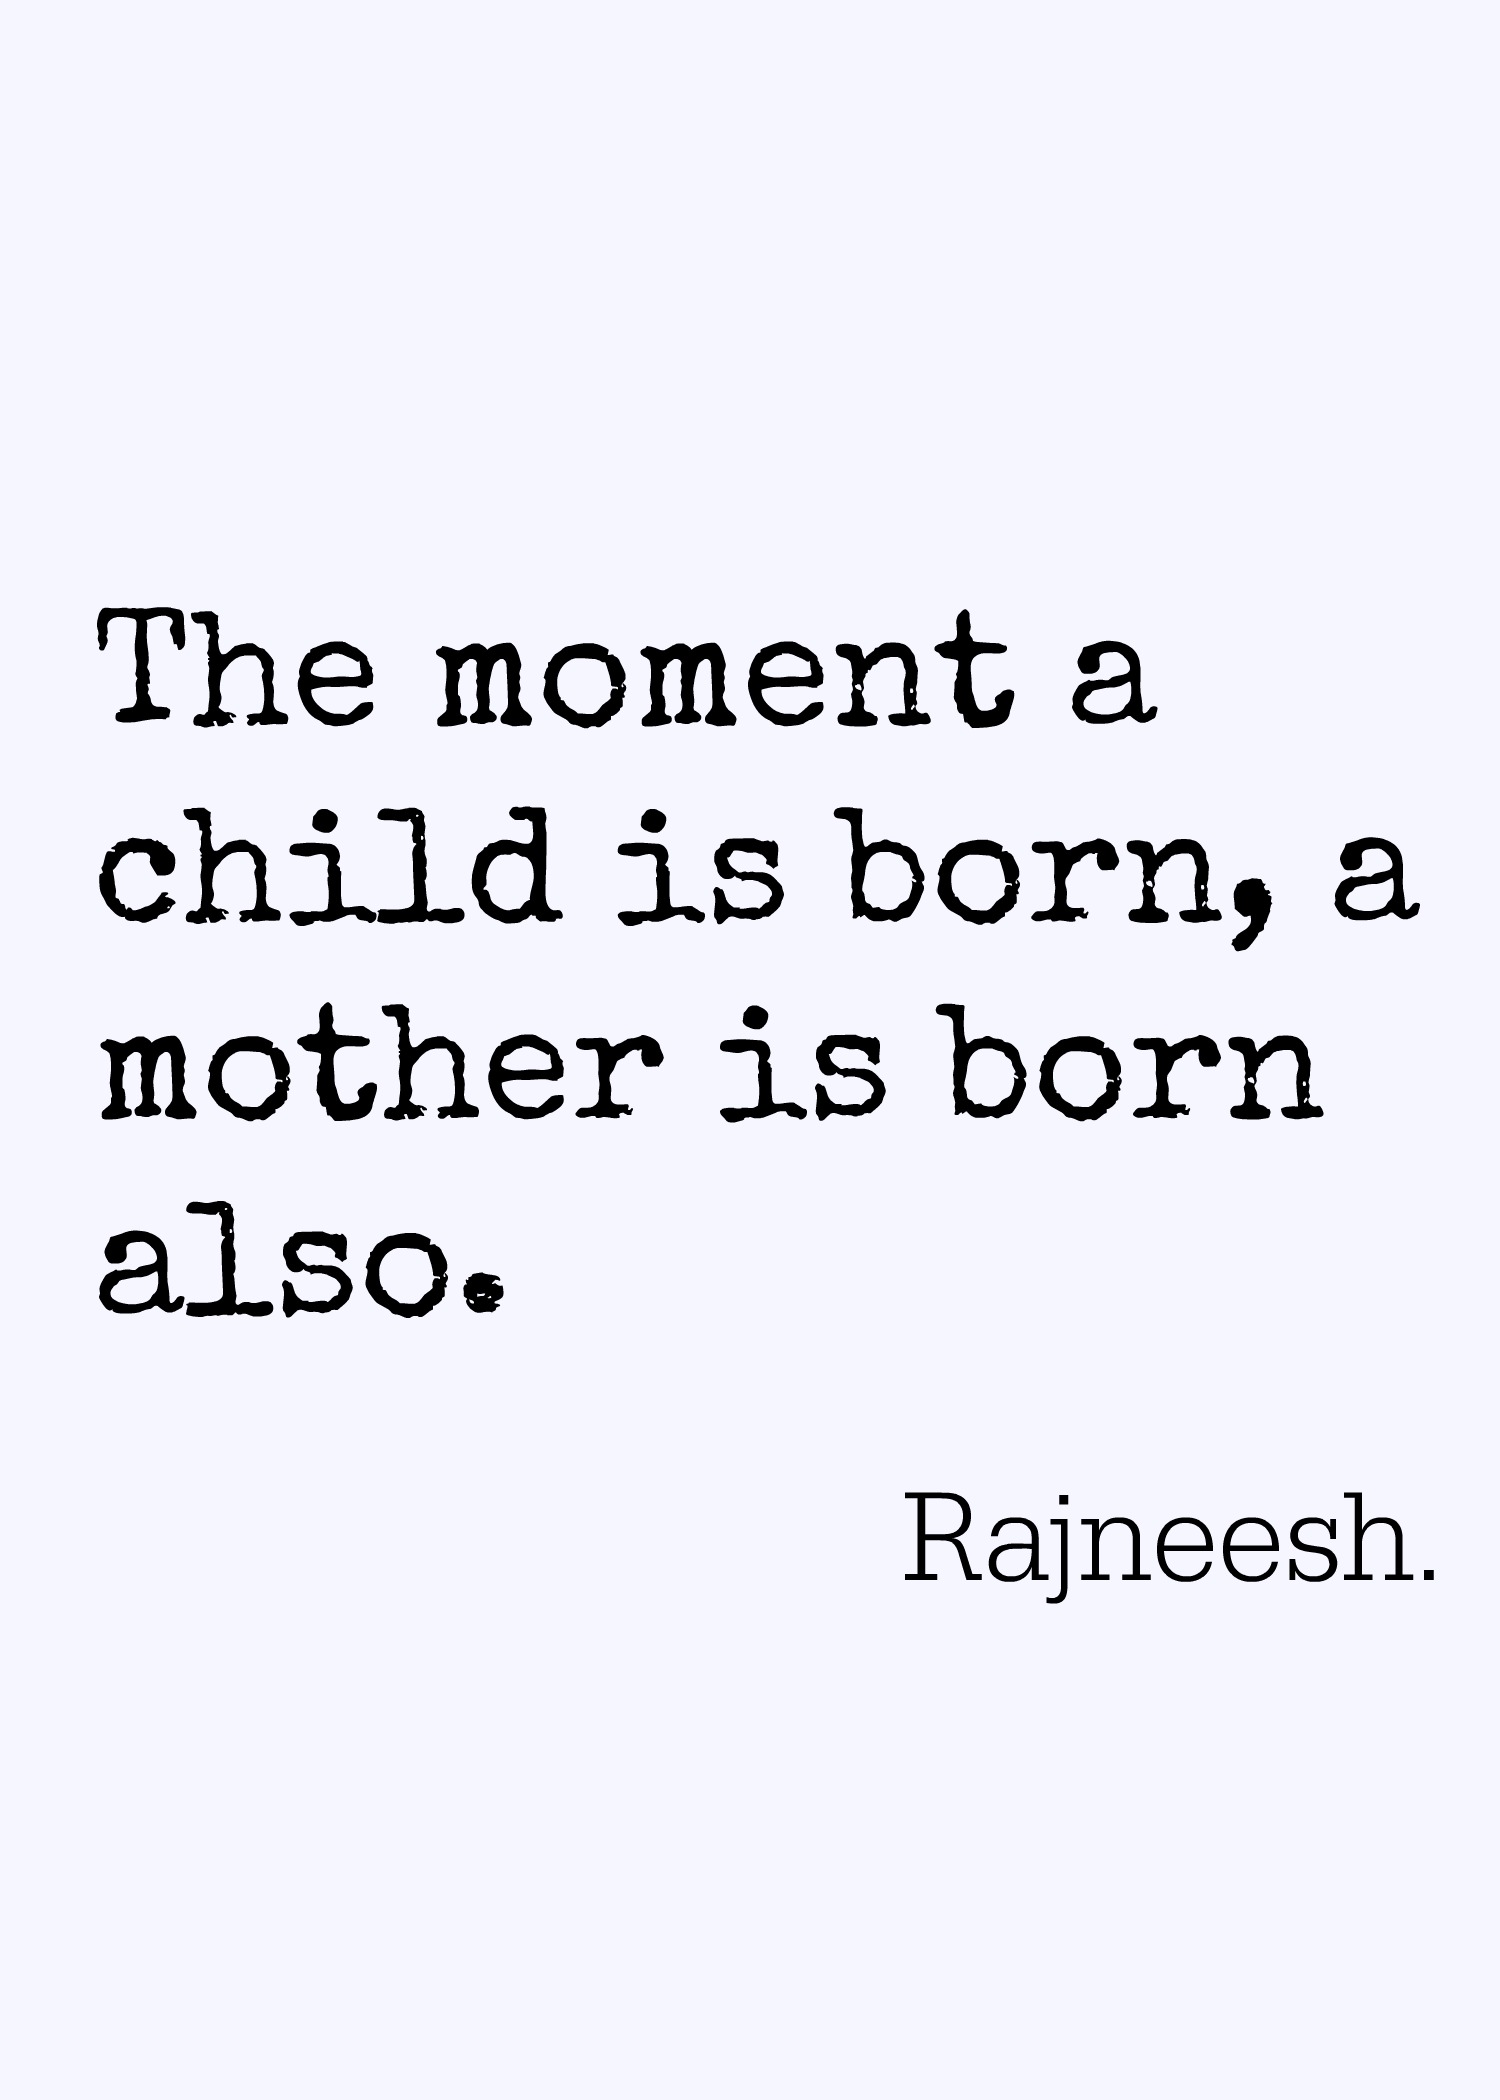 The moment a child is born, the mother is also born. Rajneesh